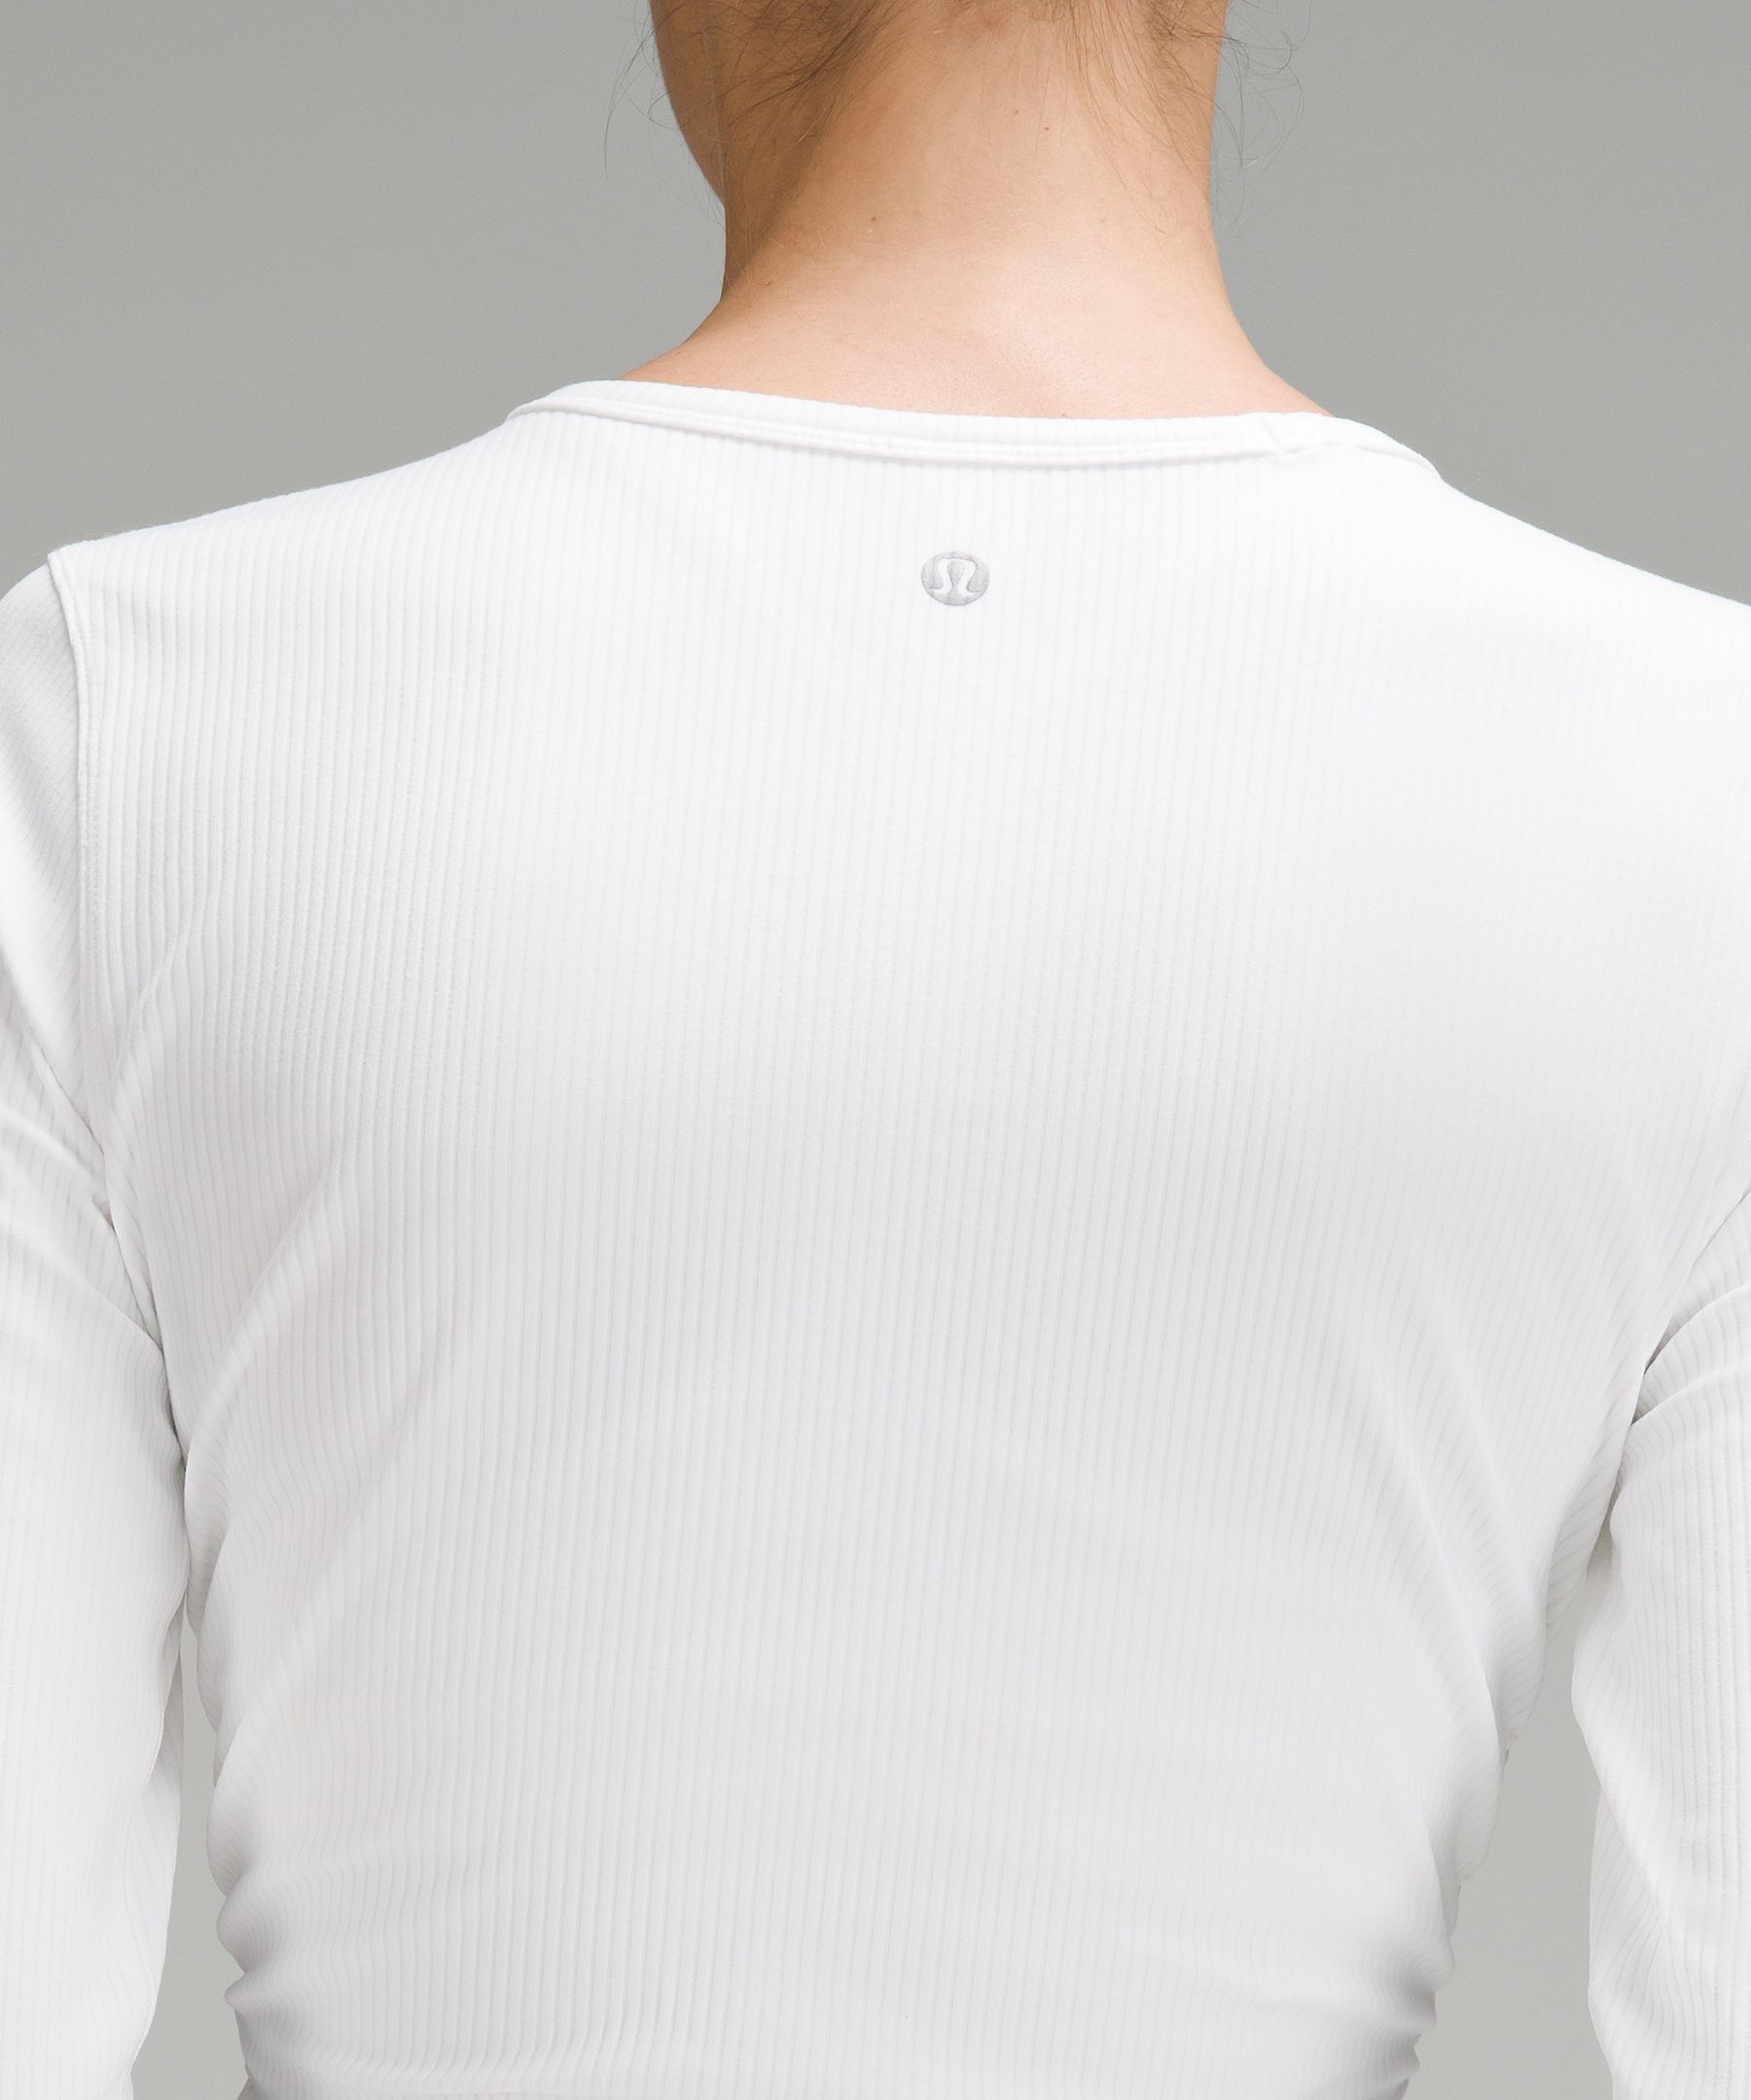 Lululemon All It Takes Long-Sleeve Shirt Nulu In Stock Availability